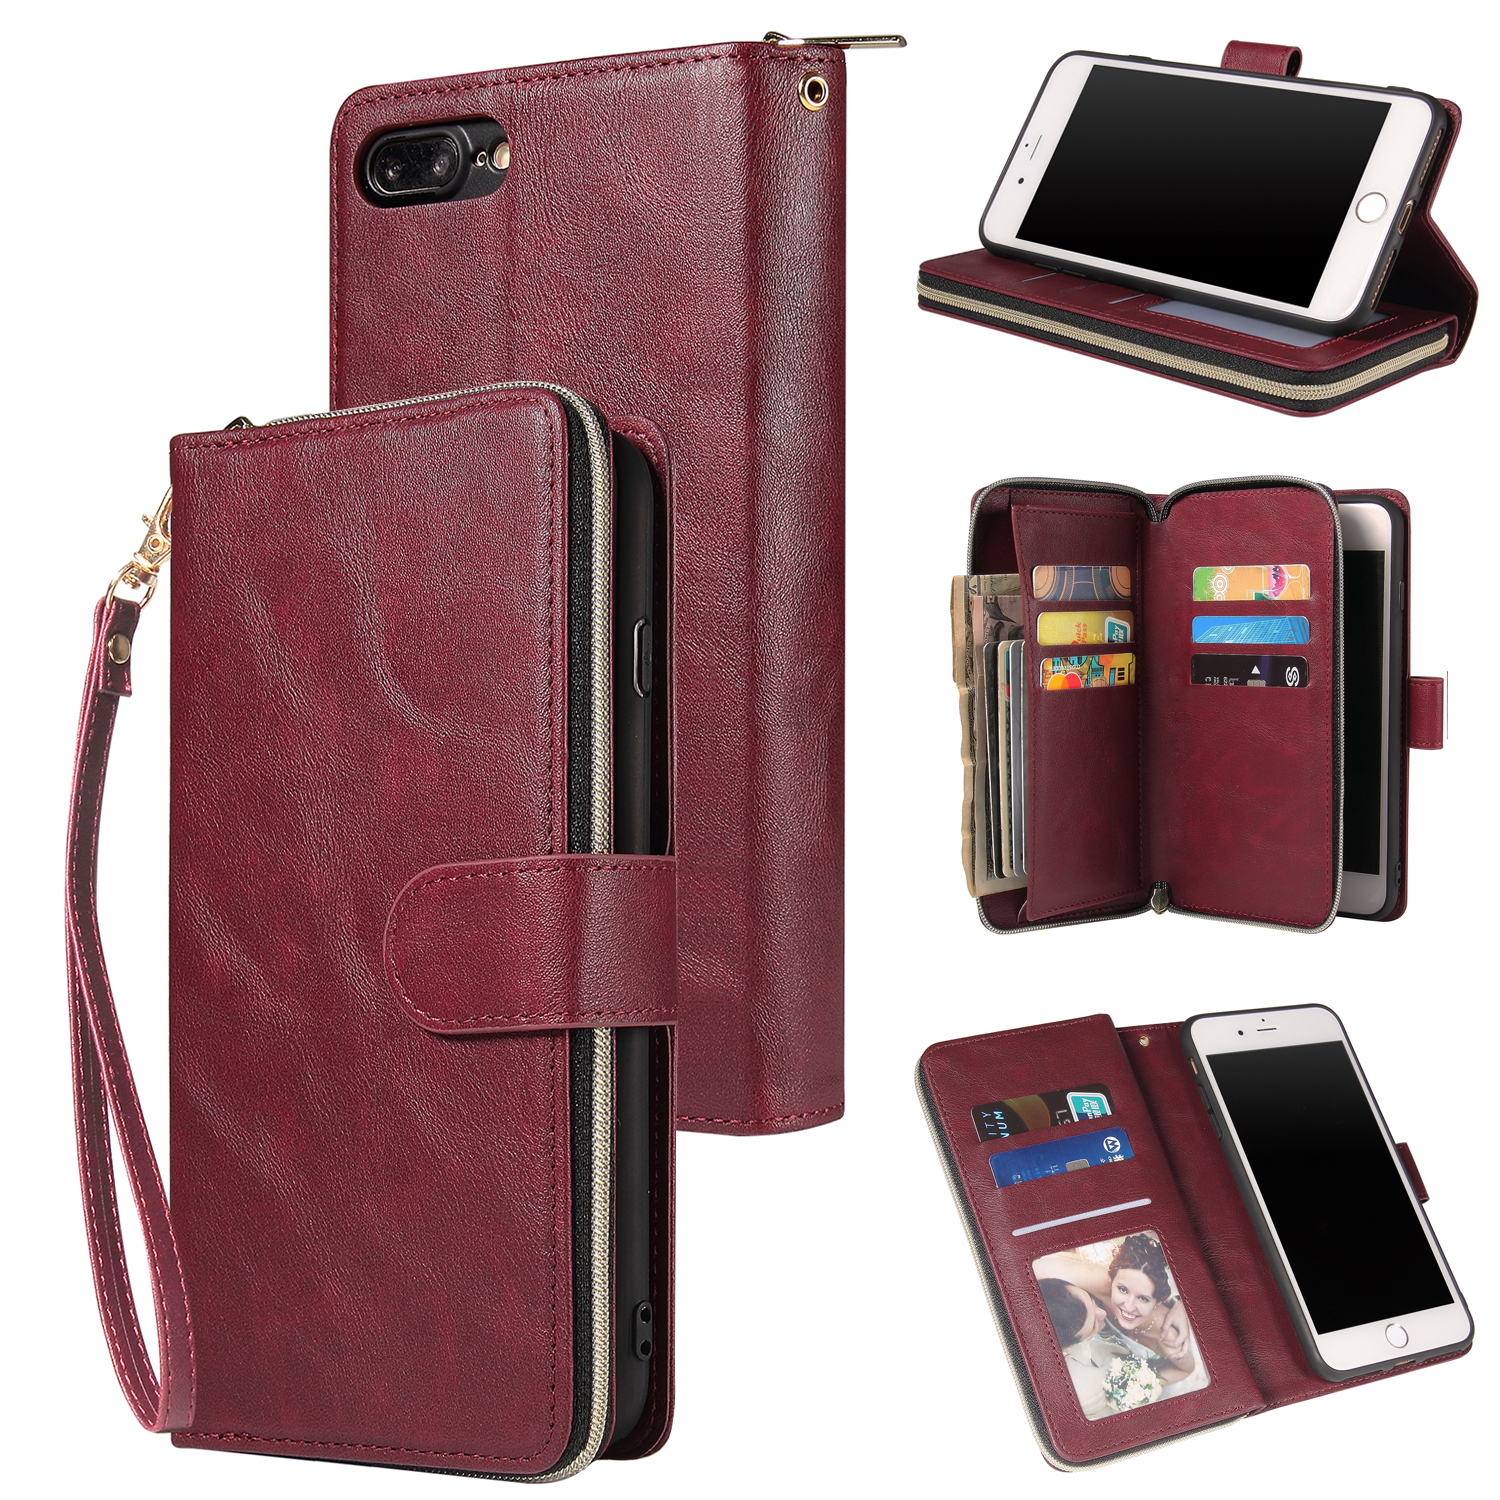 For Iphone 6/6s/6 Plus/6s Plus/7 Plus/8 Plus Pu Leather  Mobile Phone Cover Zipper Card Bag + Wrist Strap Red wine